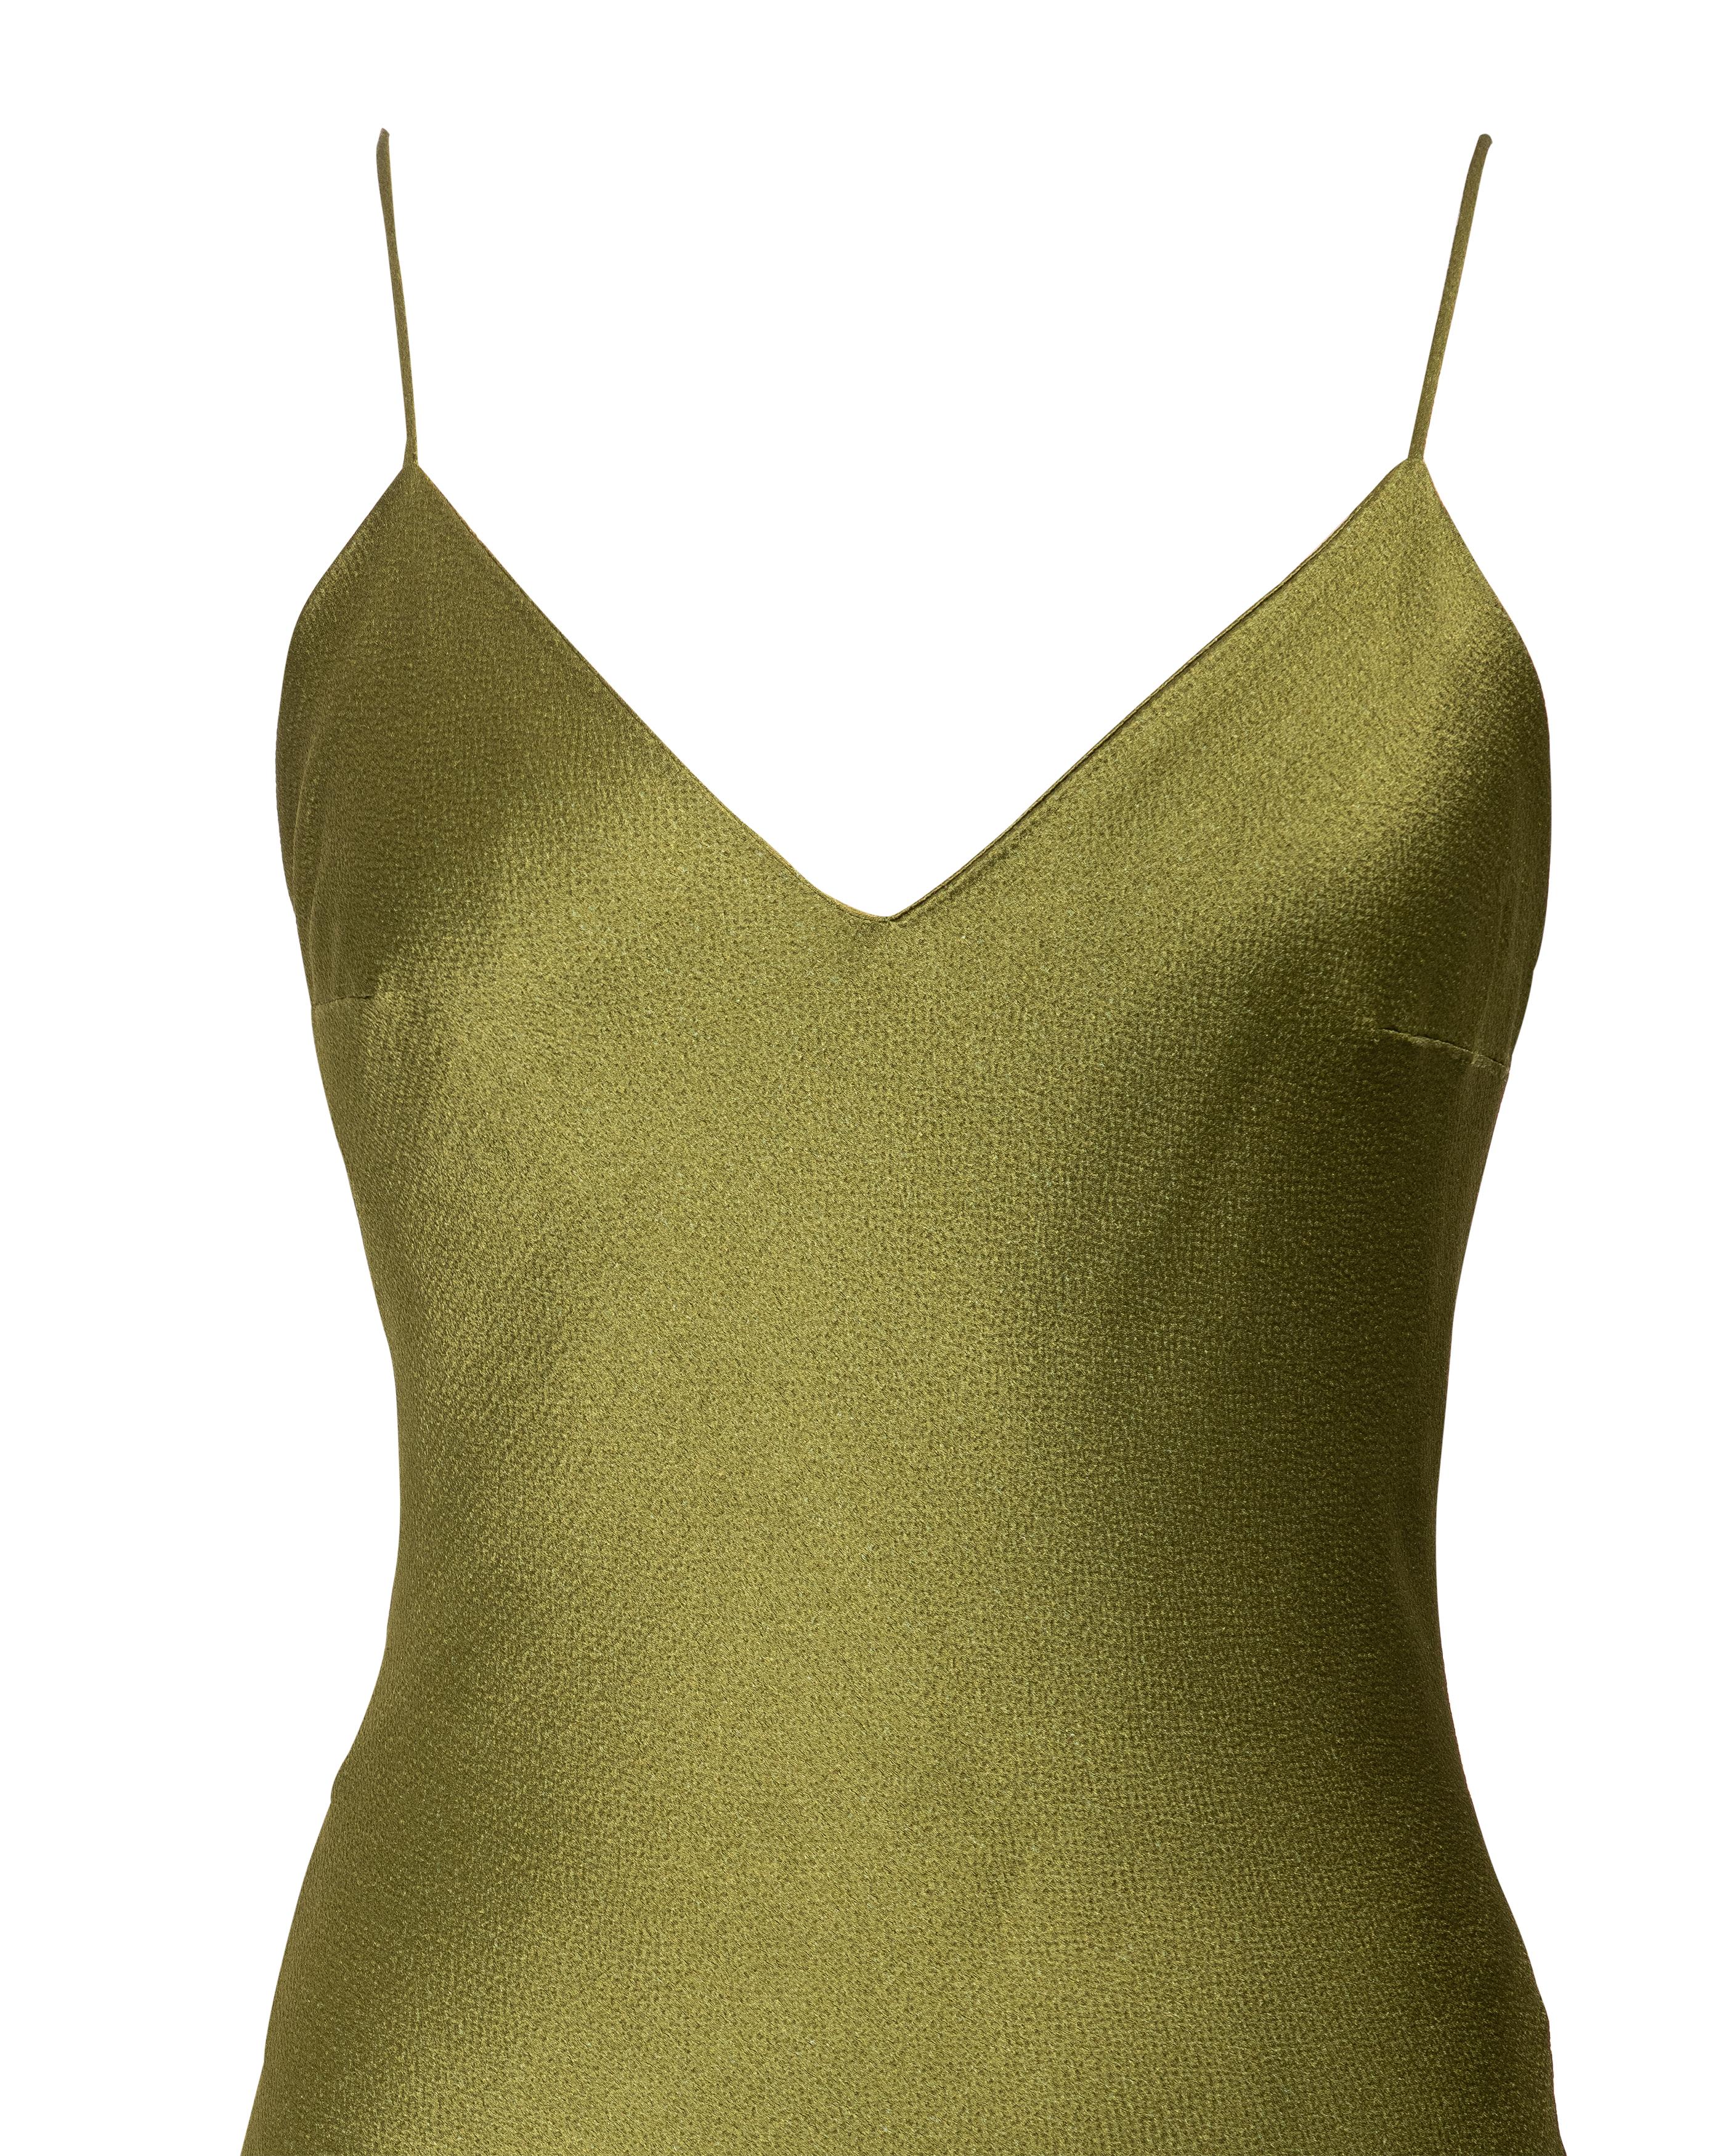 S/S 1999 Christian Dior by John Galliano Olive Green Bias Cut Slip Gown 3